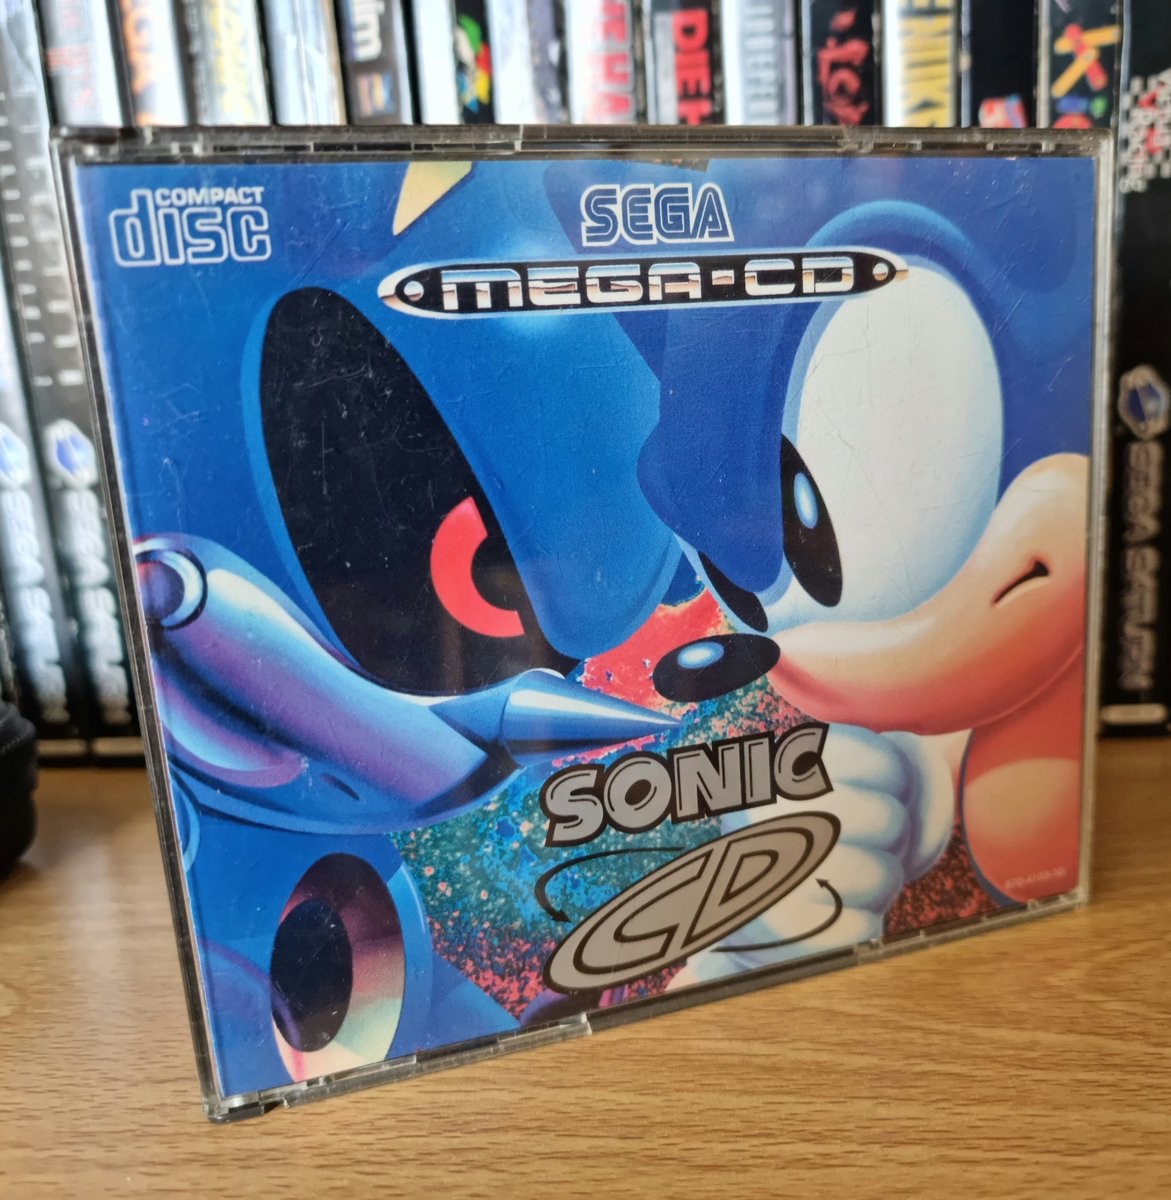 #MegacdMonday

Great intro, great music, great gameplay.  This is considered to be the best Sonic game.  Do you agree?

#gamers #gamersunite #gamer #gaming #gamingcommunity #retrogamer #retrogames #retrogaming